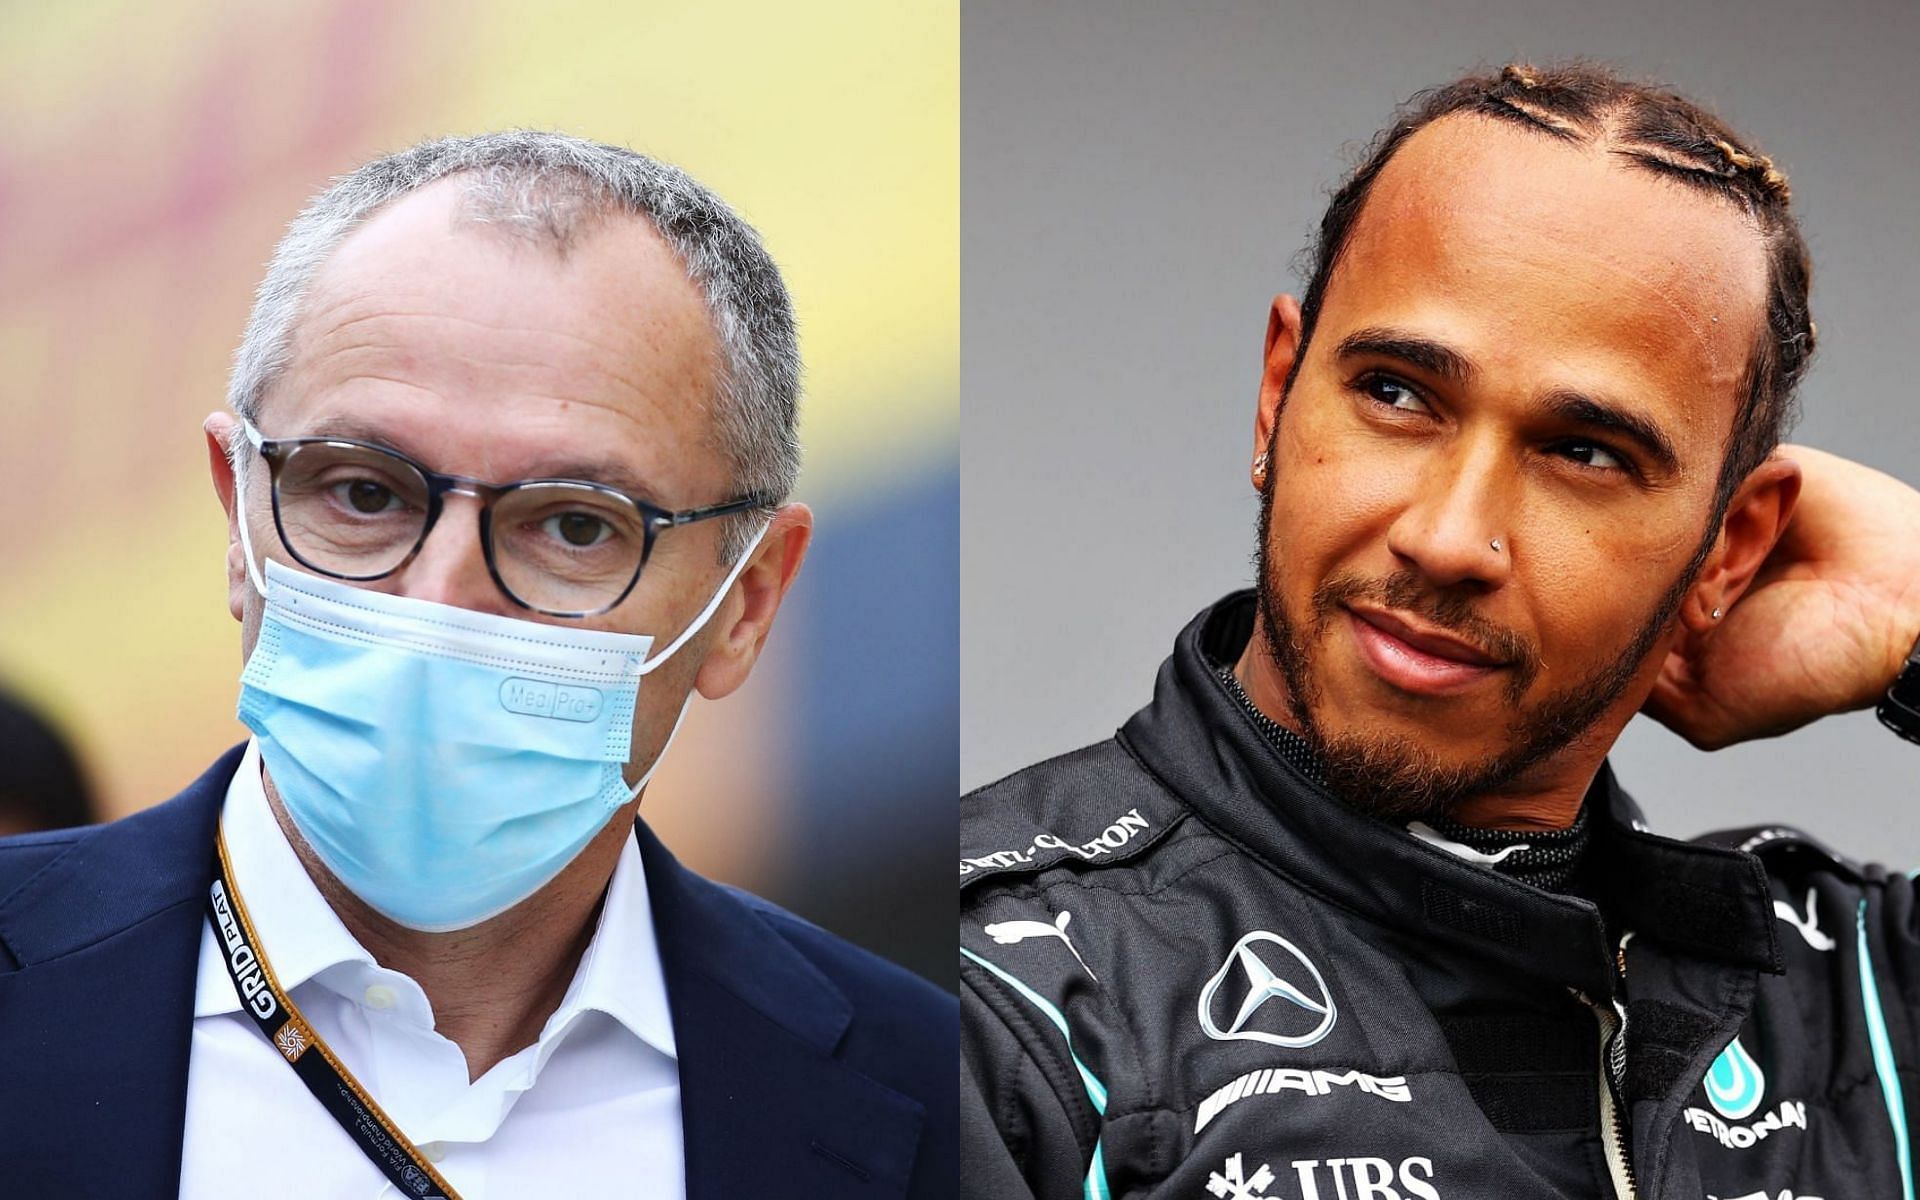 Stefano Domenicali (left) was criticized by Lewis Hamilton&#039;s (right) fans for his recent interview